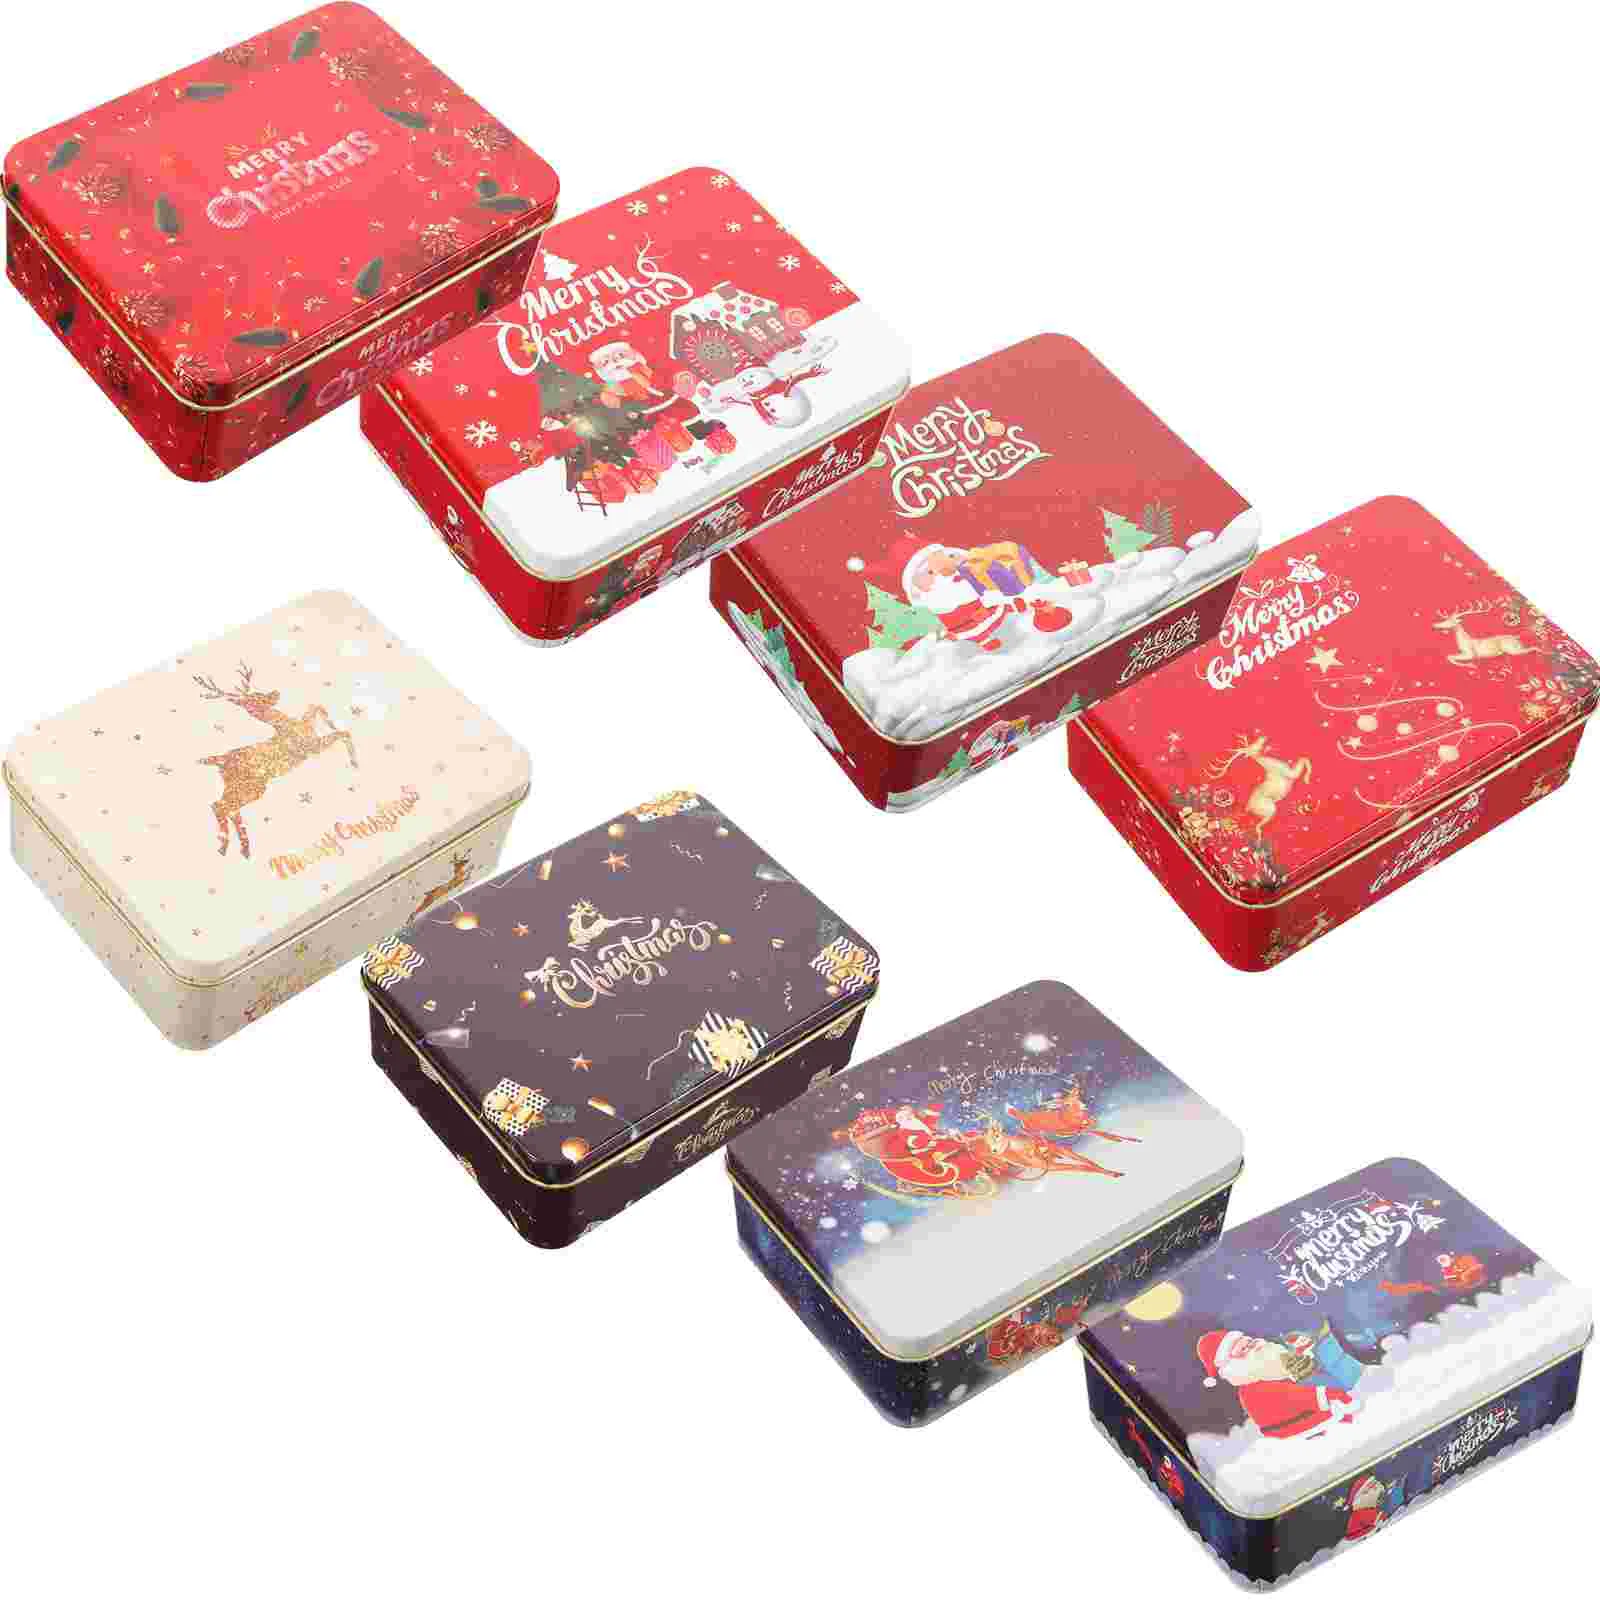 

Christmas Cookie Tins Lids Round Retro Candy Tinplate Tins Empty Gift Candy Box Cookie Containers Storing Biscuits